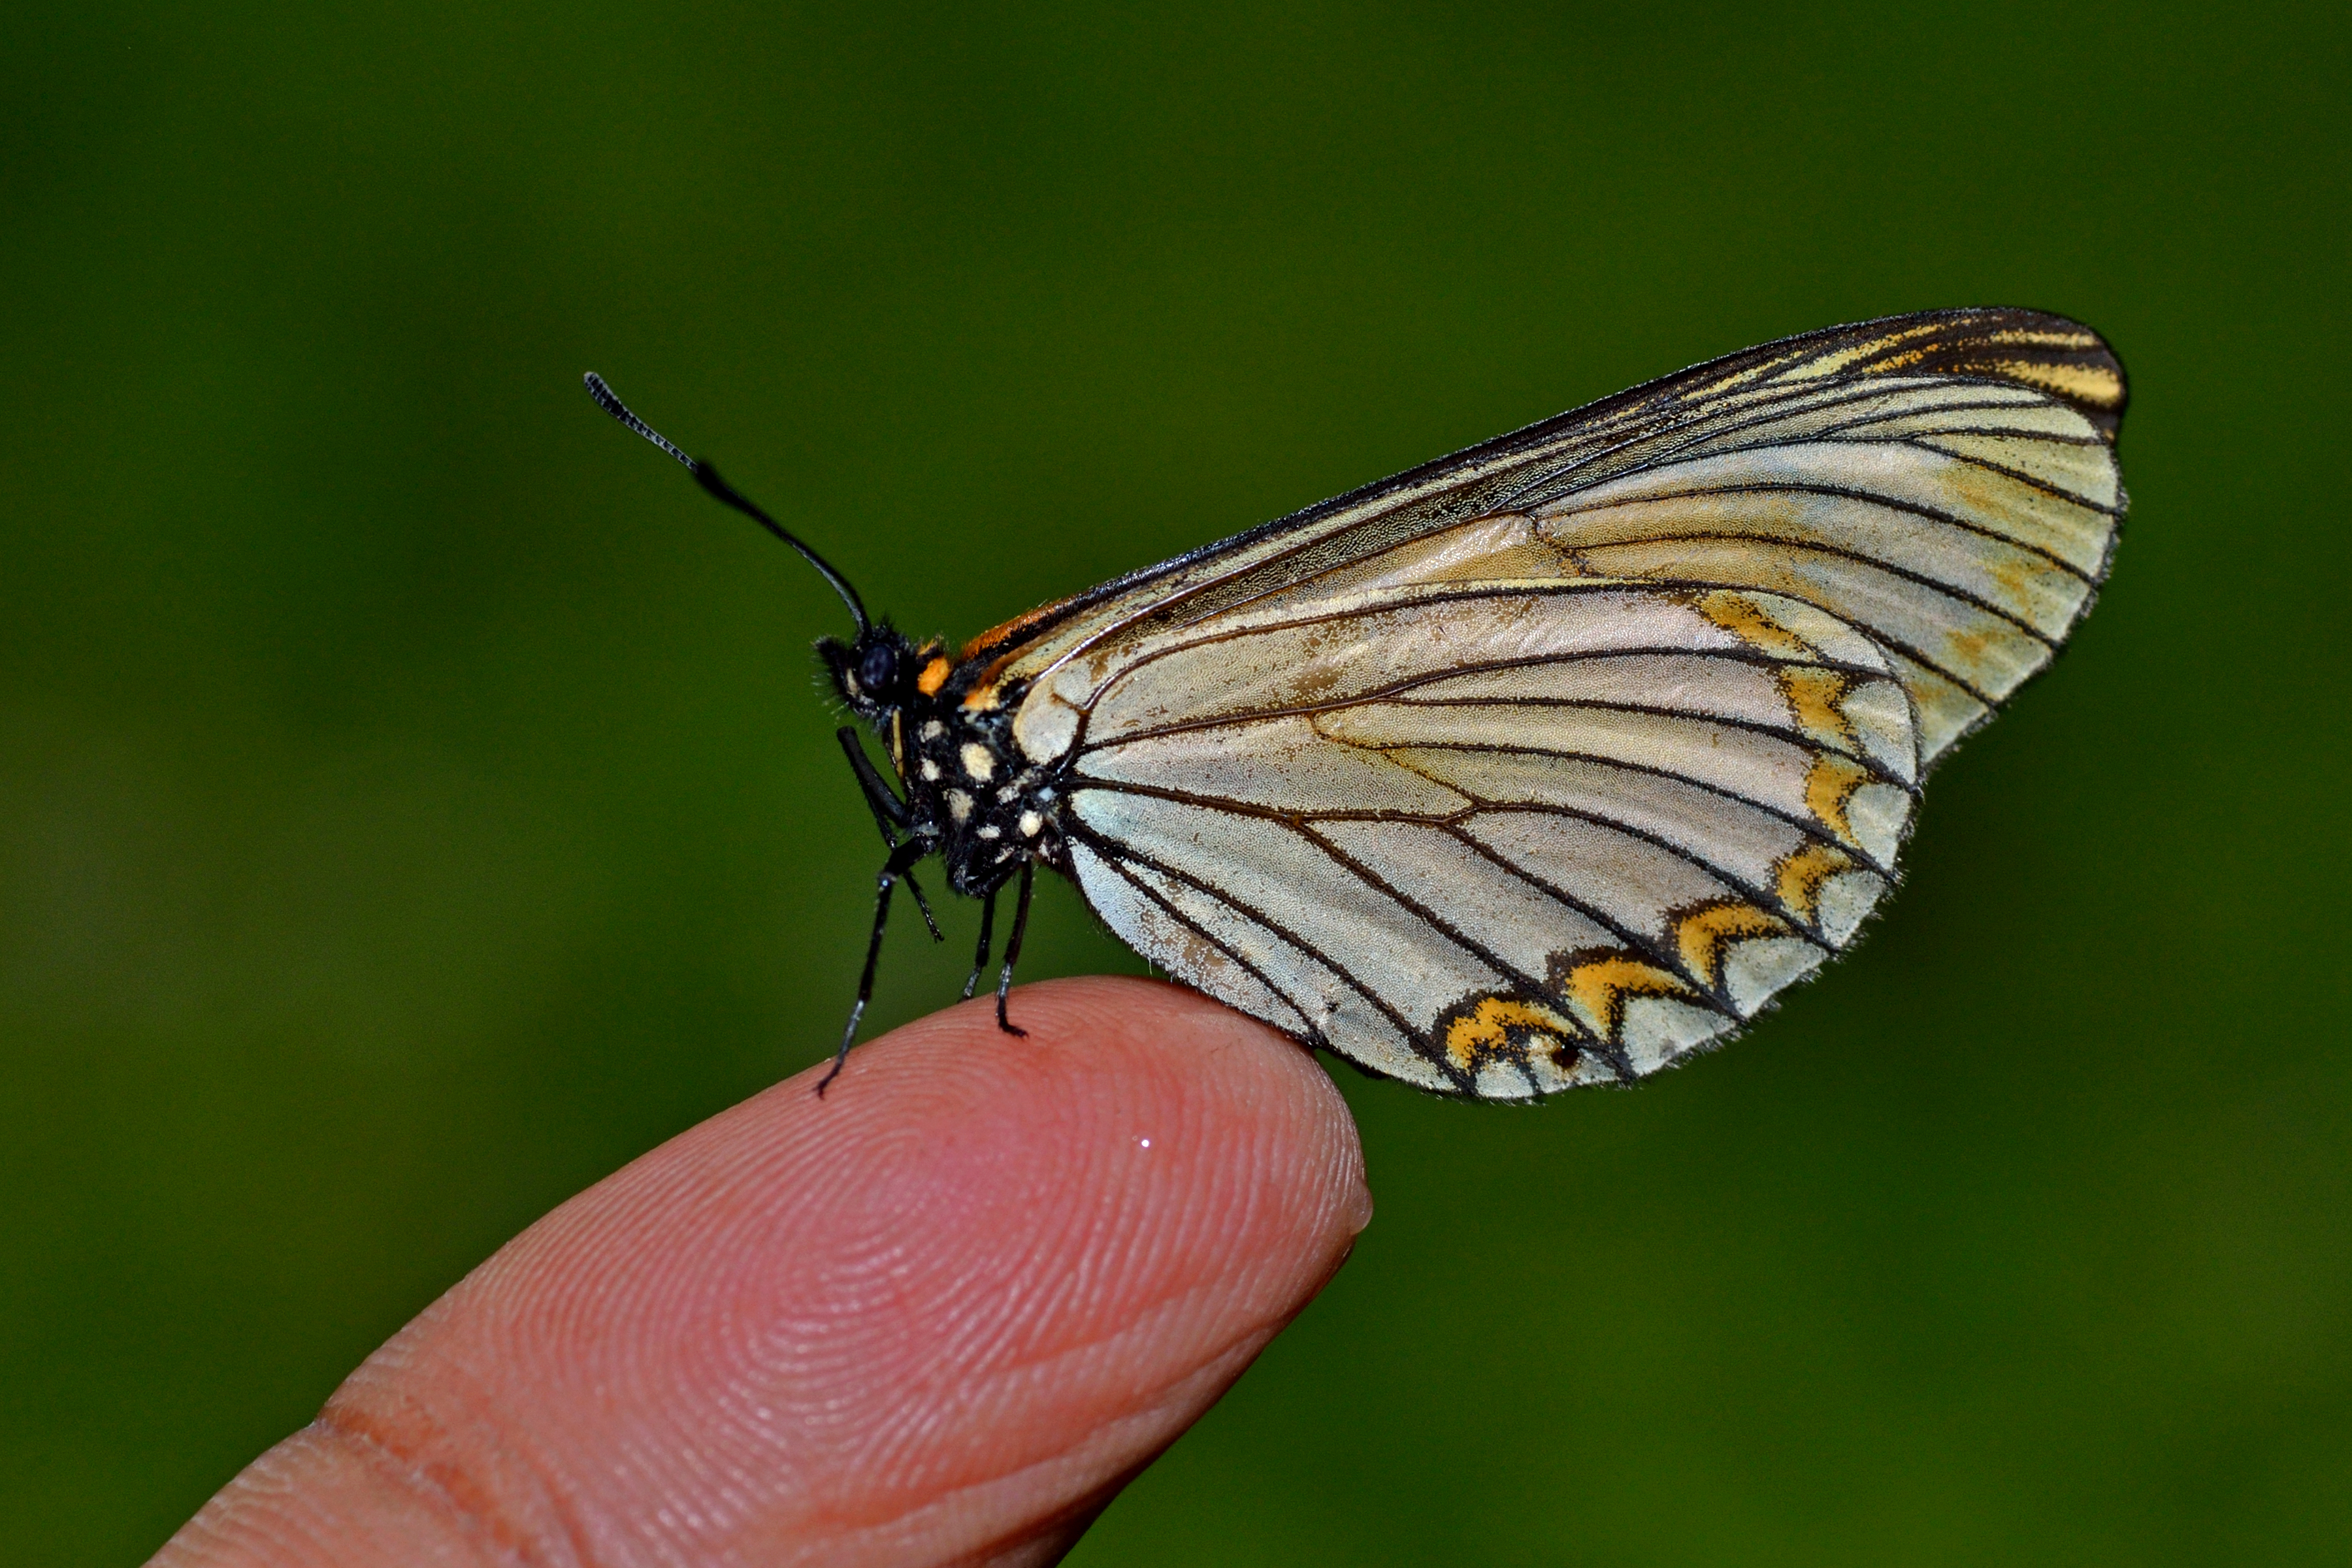 Close wing position of Acraea issoria Hübner, 1818 – Yellow Coster WLB DSC 3877